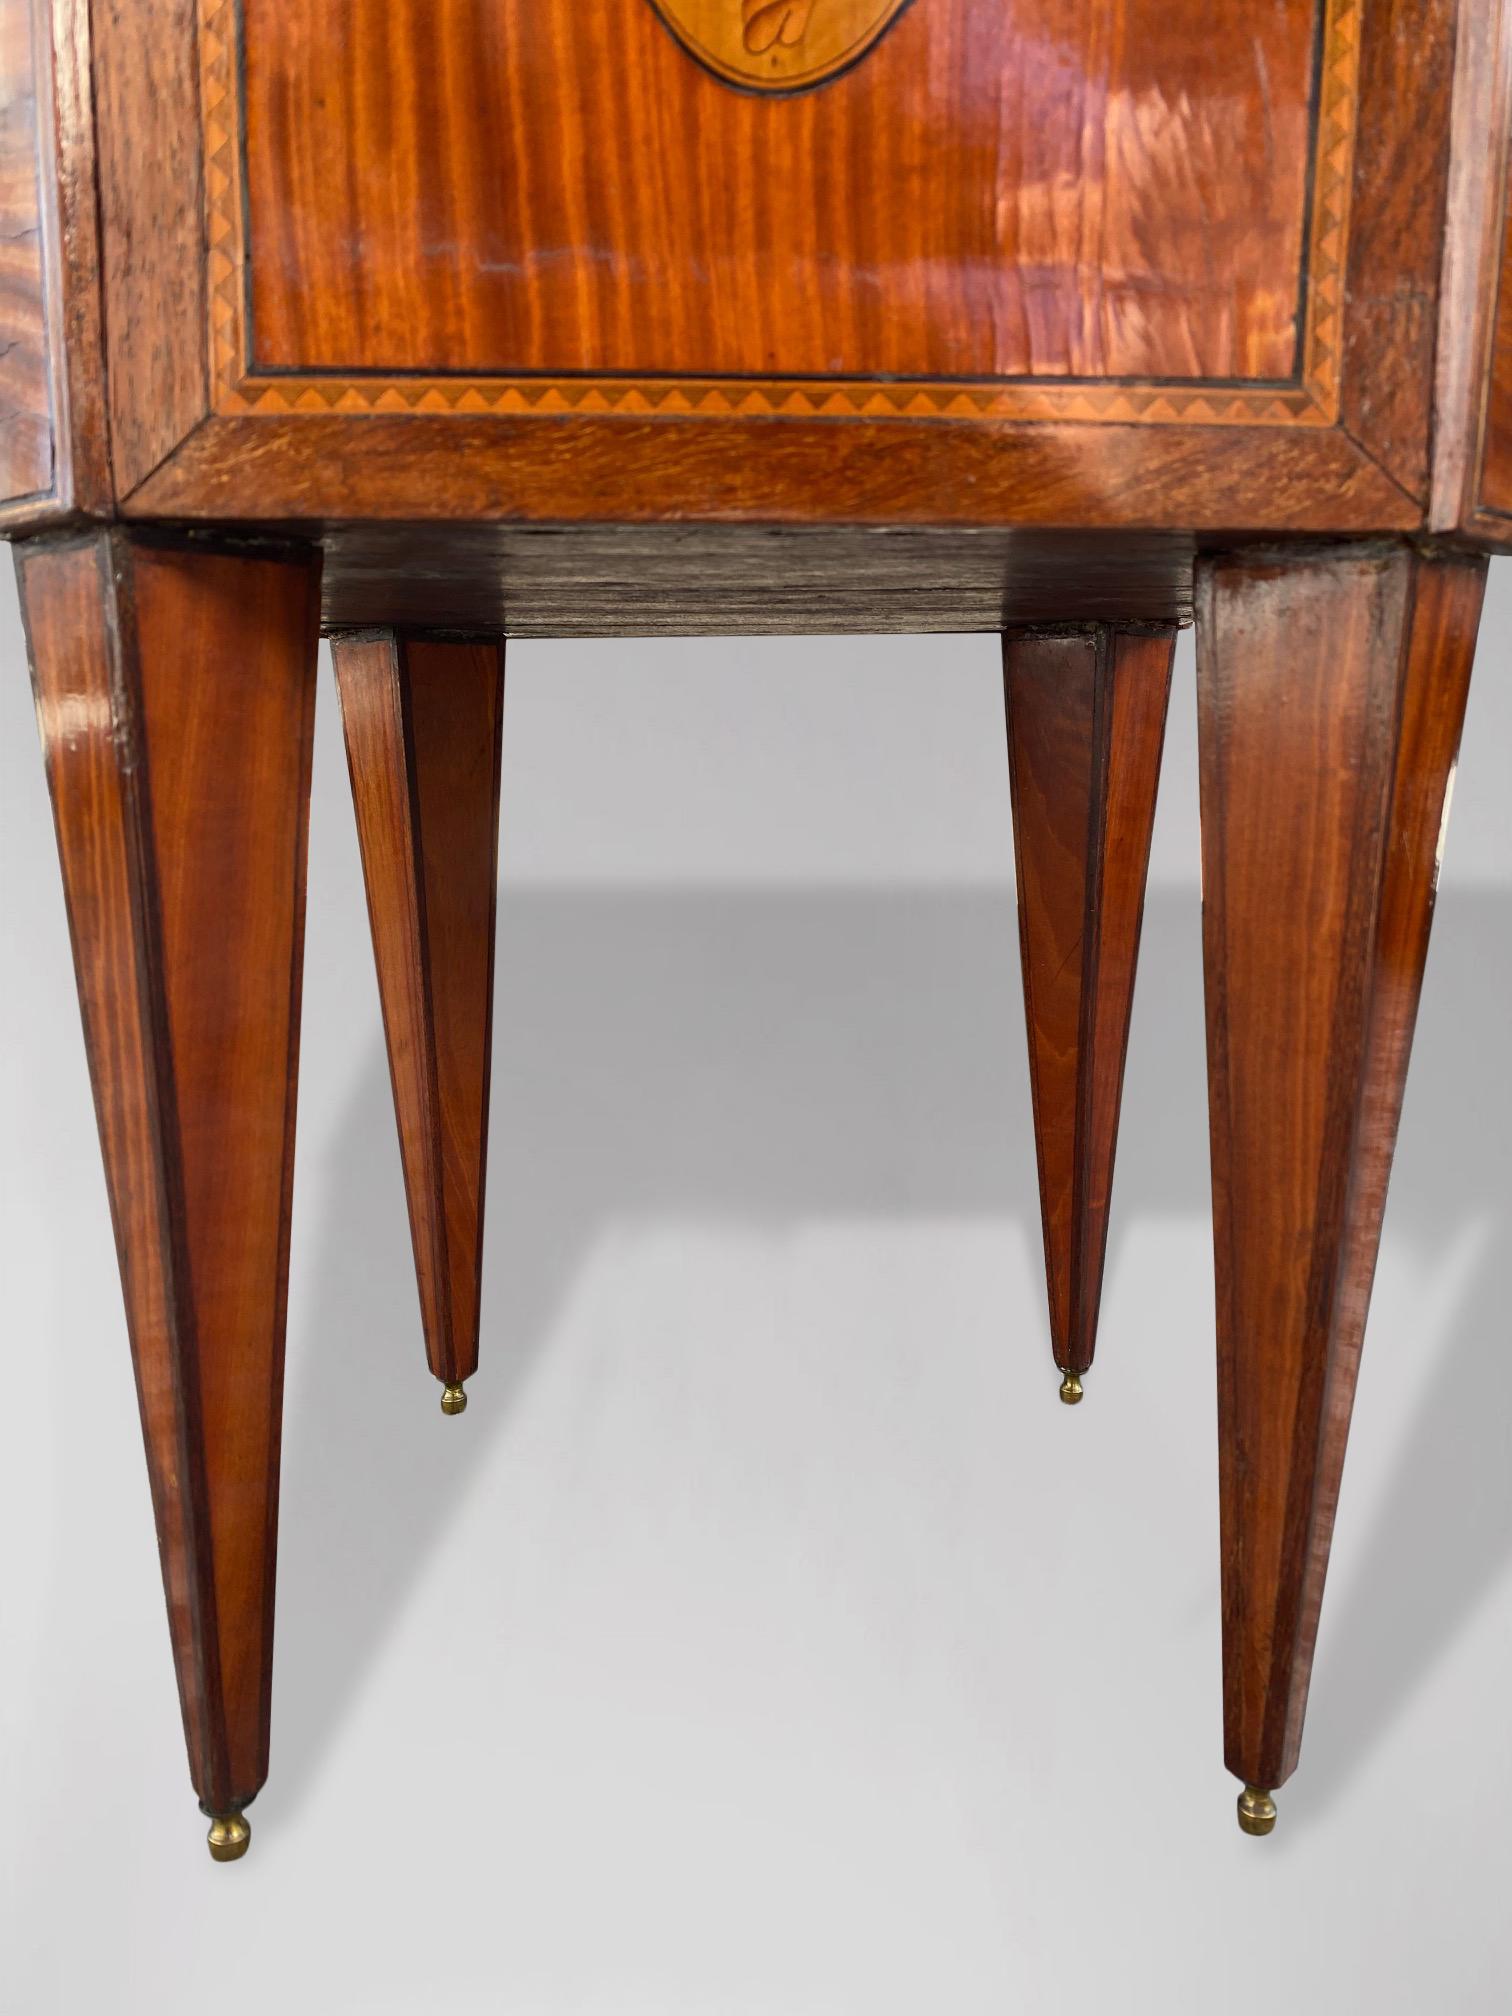 Hand-Crafted 20th Century Edwardian Period Mahogany and Marquetry Jardinière